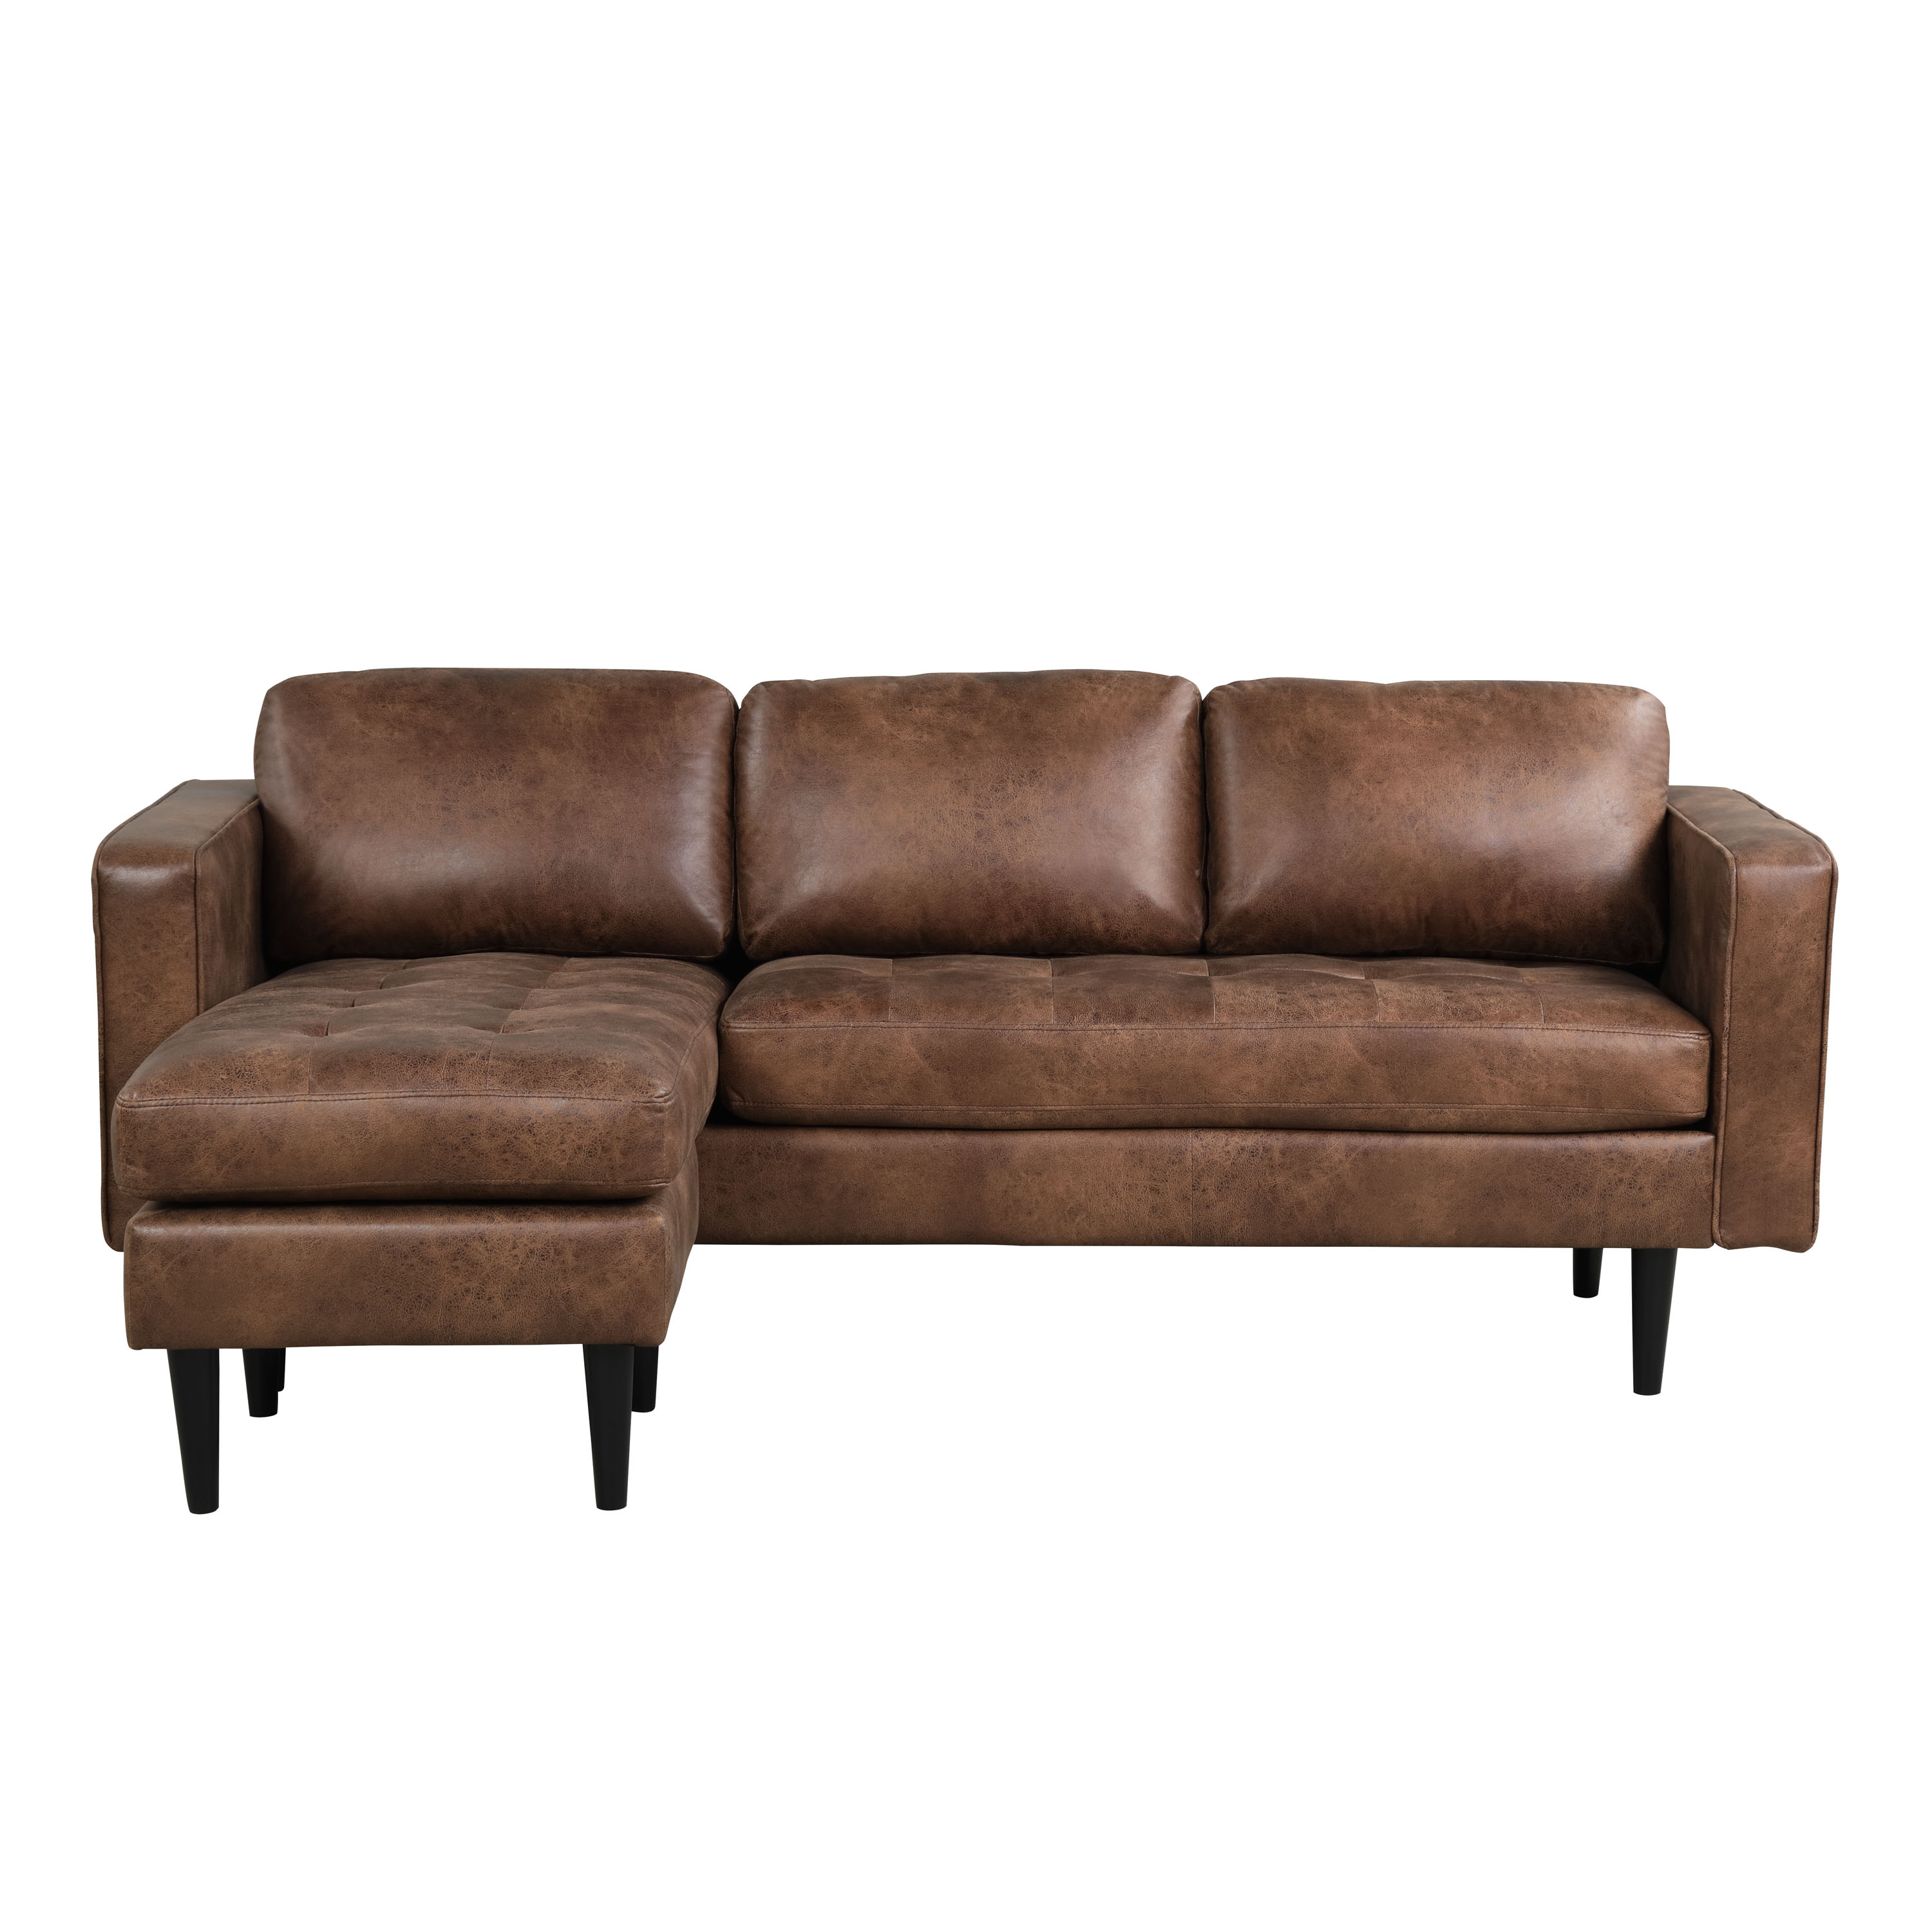 Lifestyle Solutions Manila Modern Sectional Sofa with Chaise, Brown Faux Leather - image 2 of 5